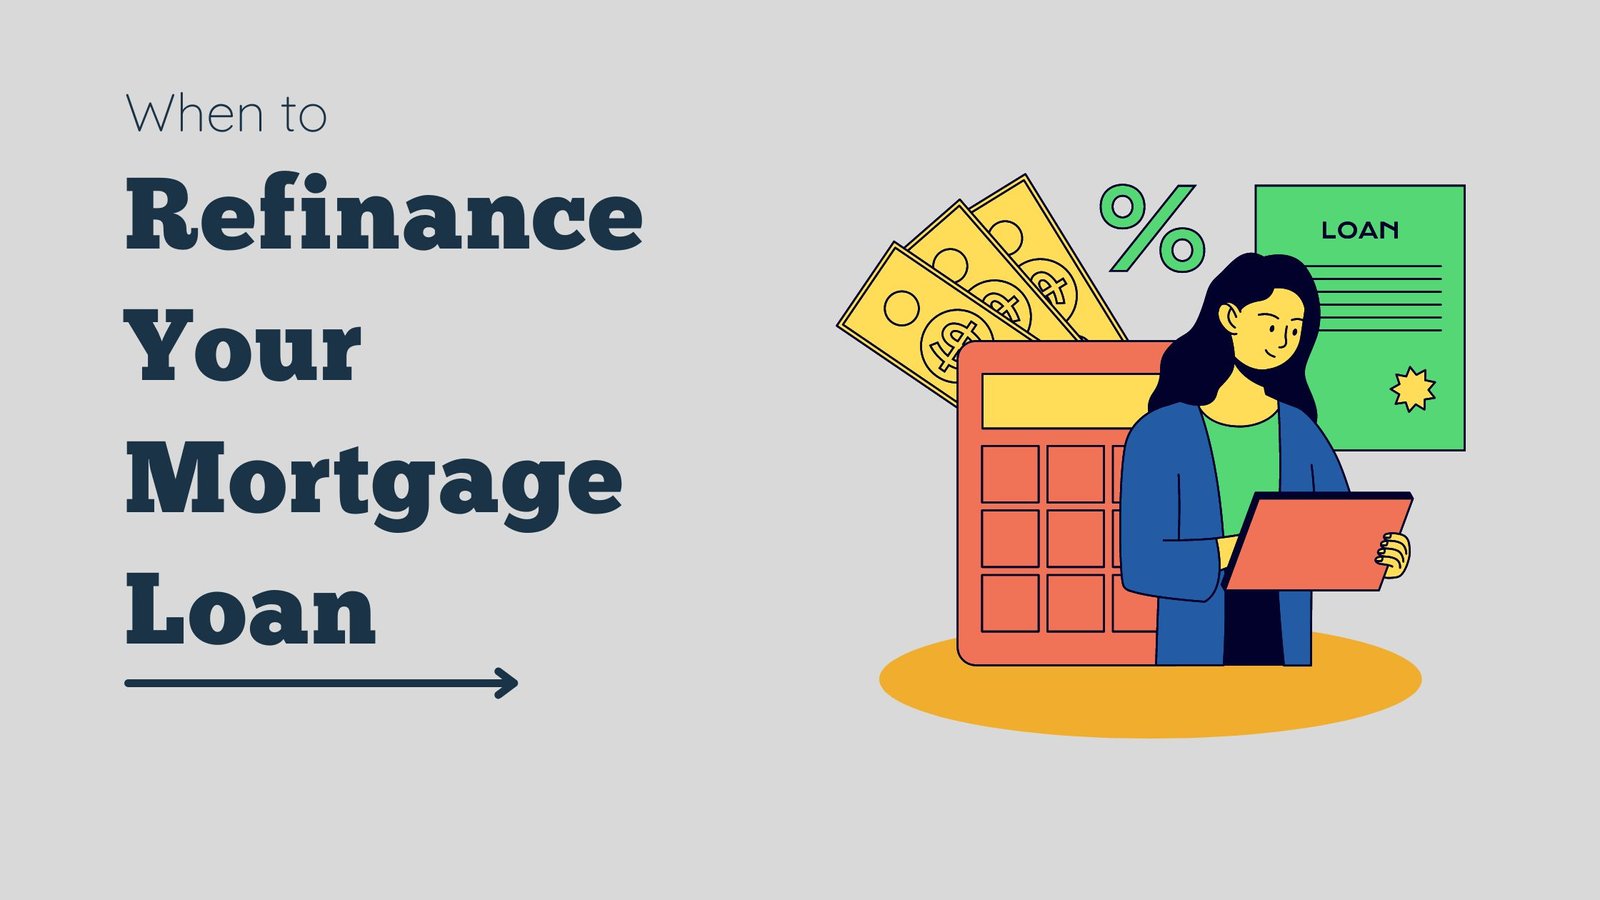 When to Refinance Your Mortgage Loan in Cheyenne